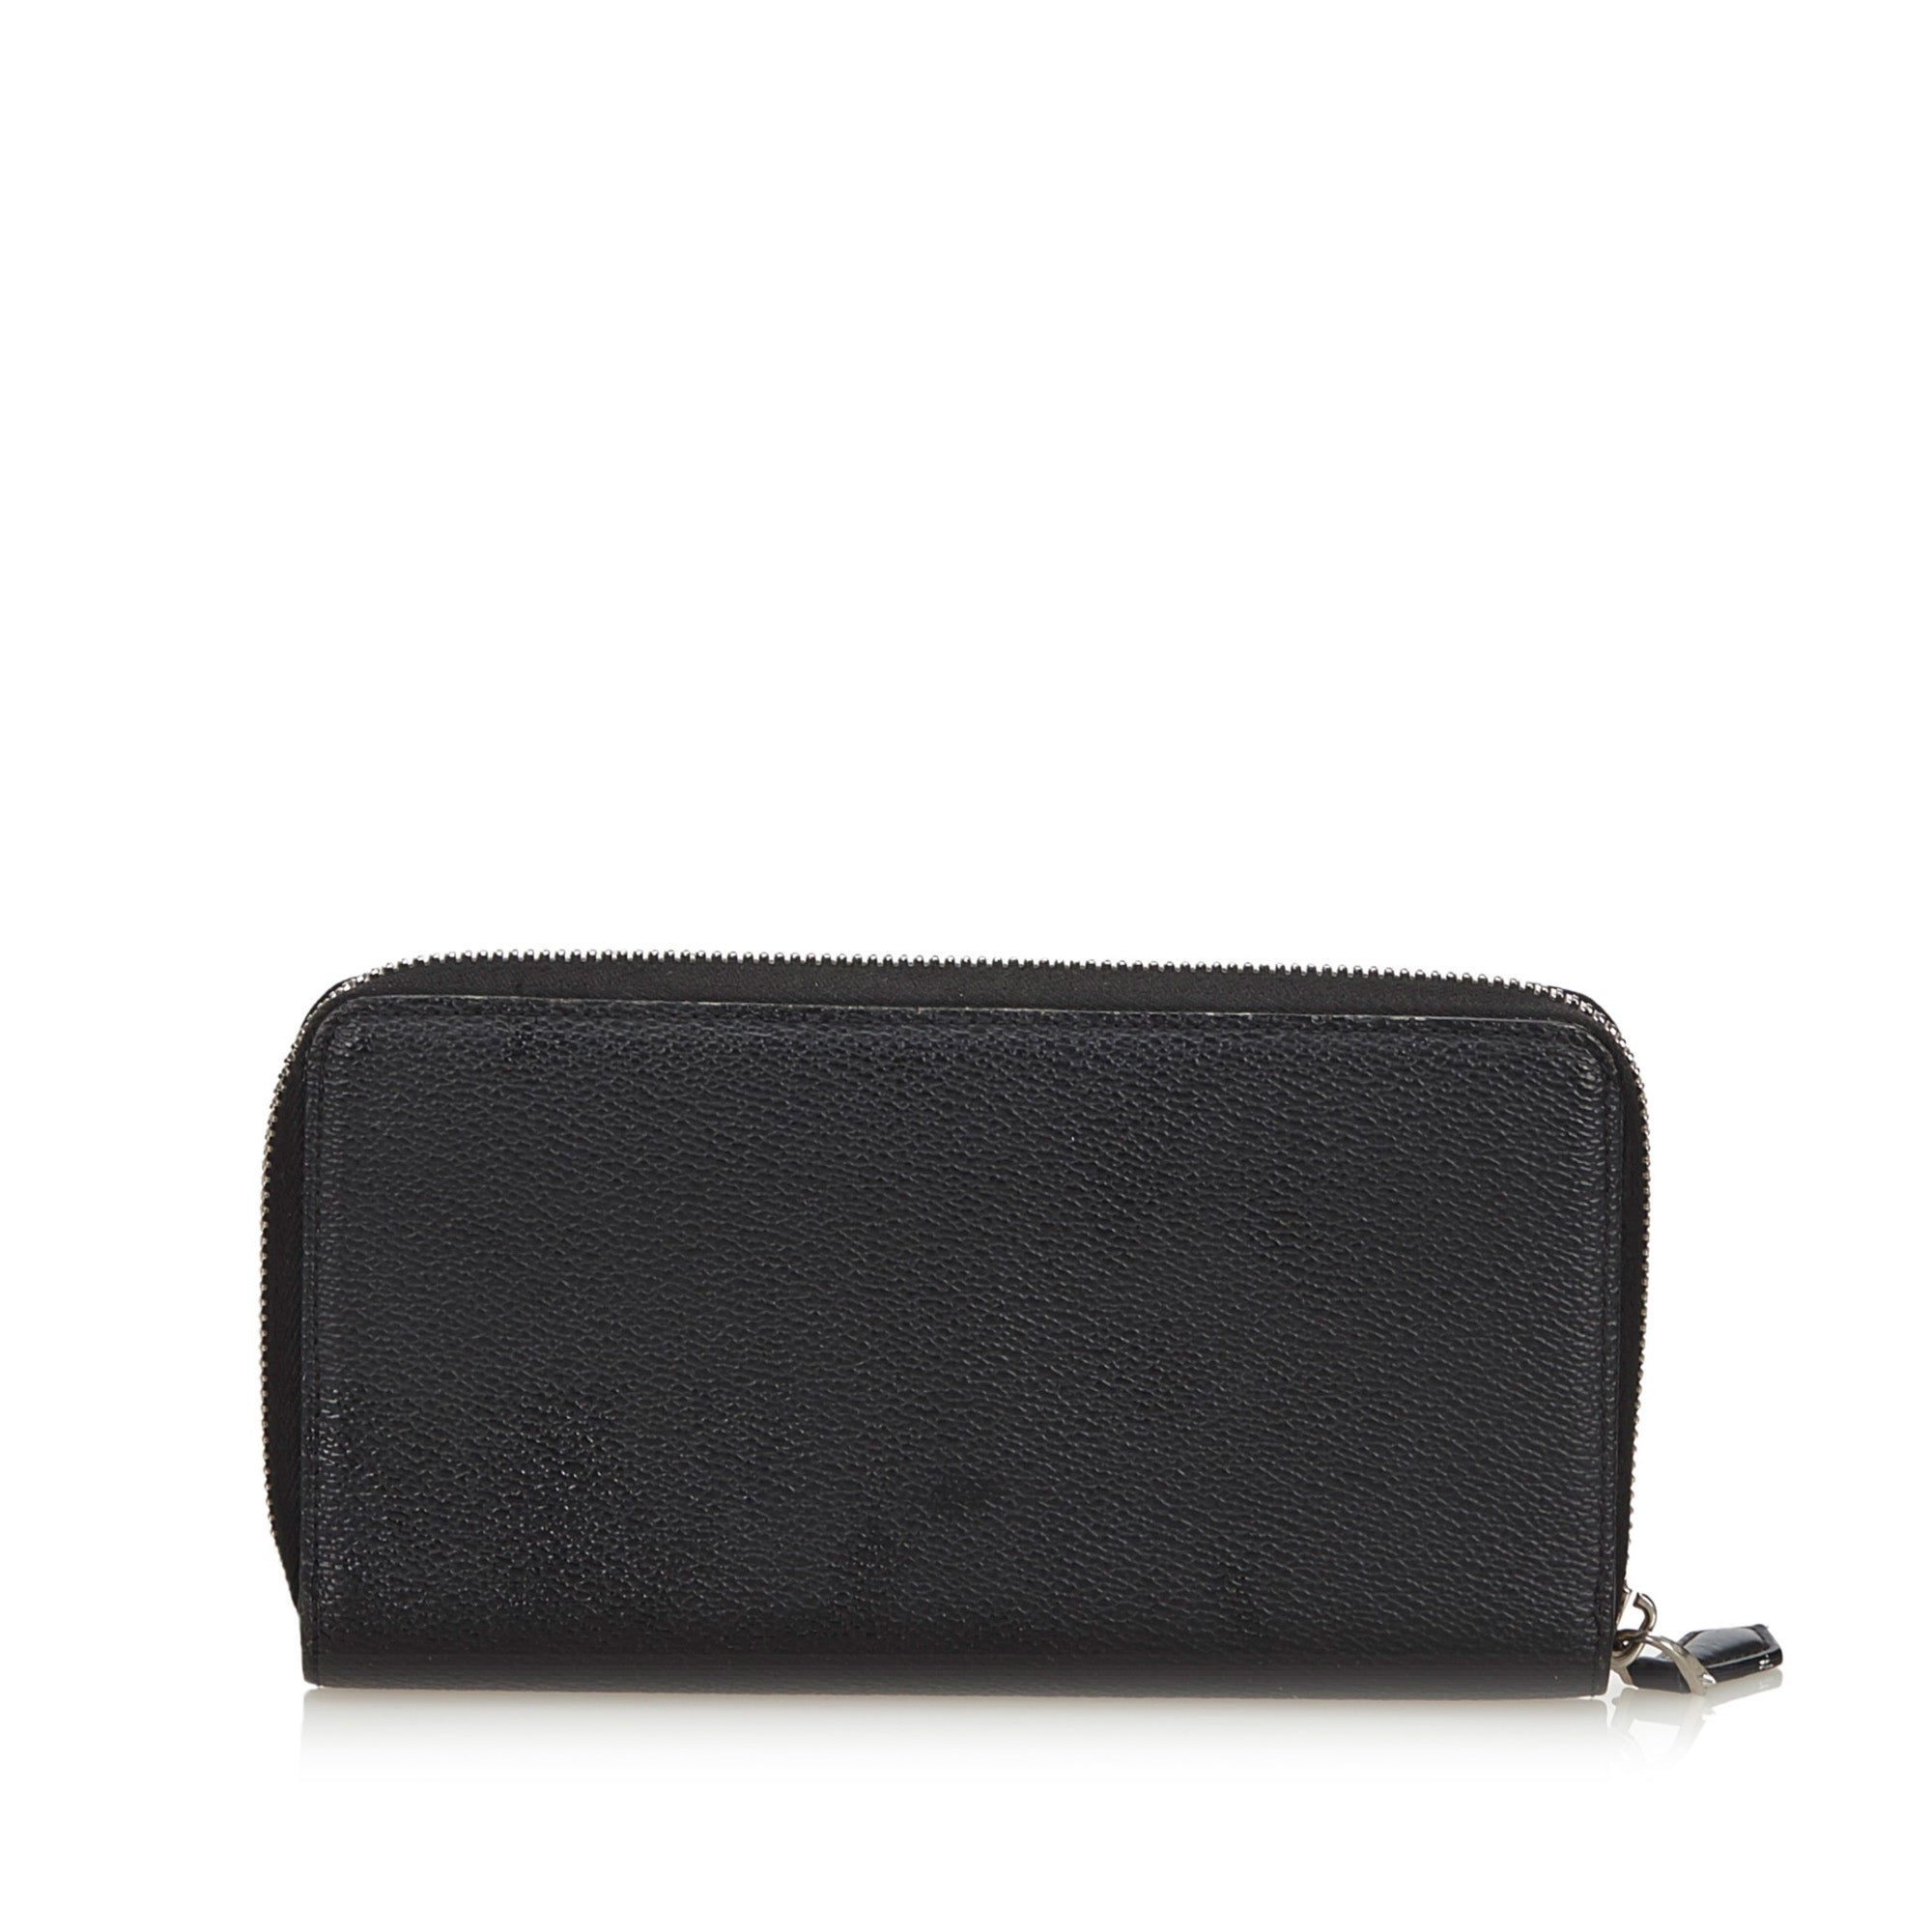 givenchy monkey brothers wallet